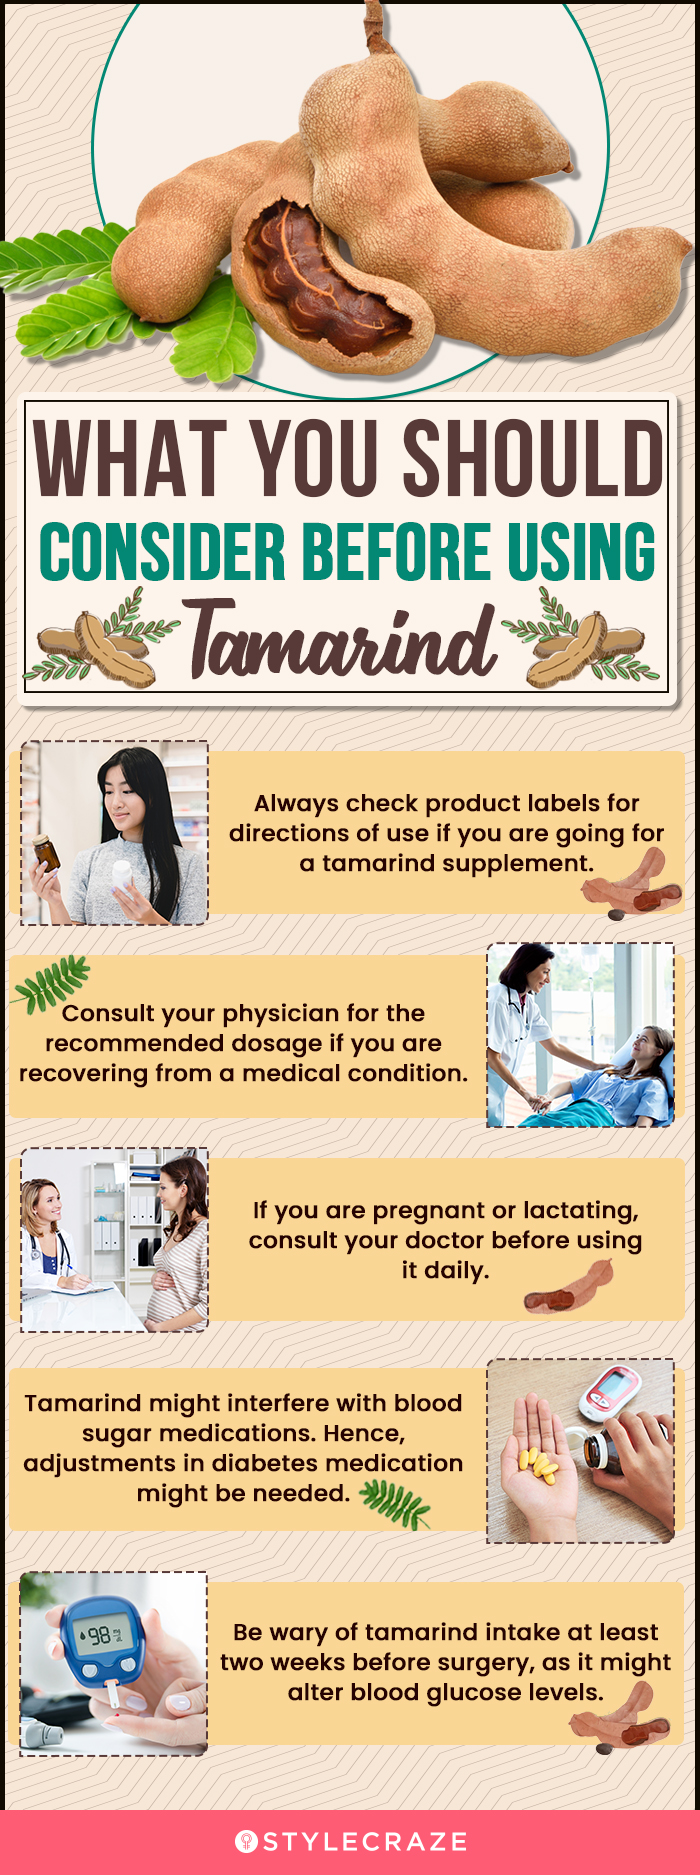 what you should consider before using tamarind (infographic)